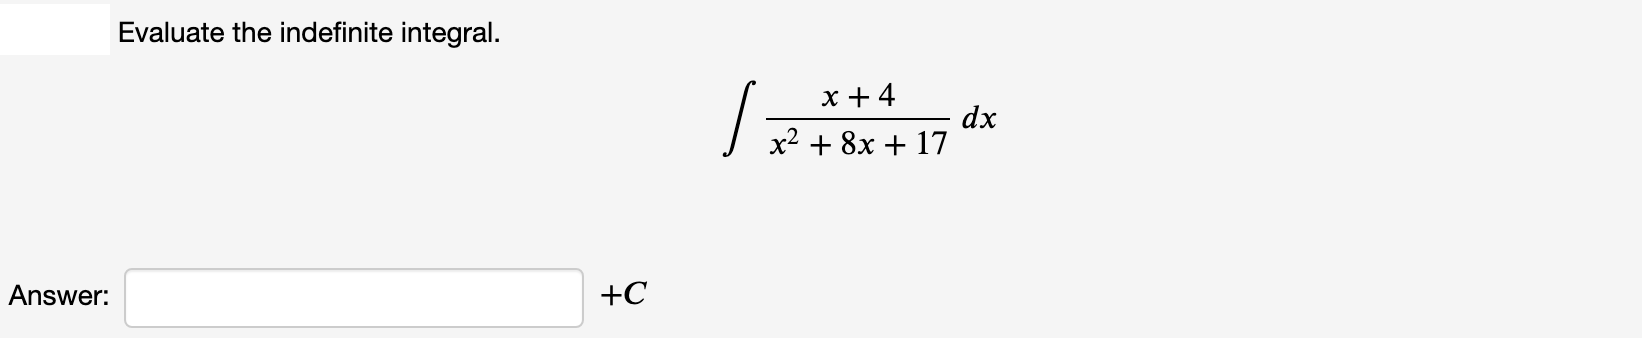 Evaluate the indefinite integral.
x + 4
dx
x2 + 8x + 17
